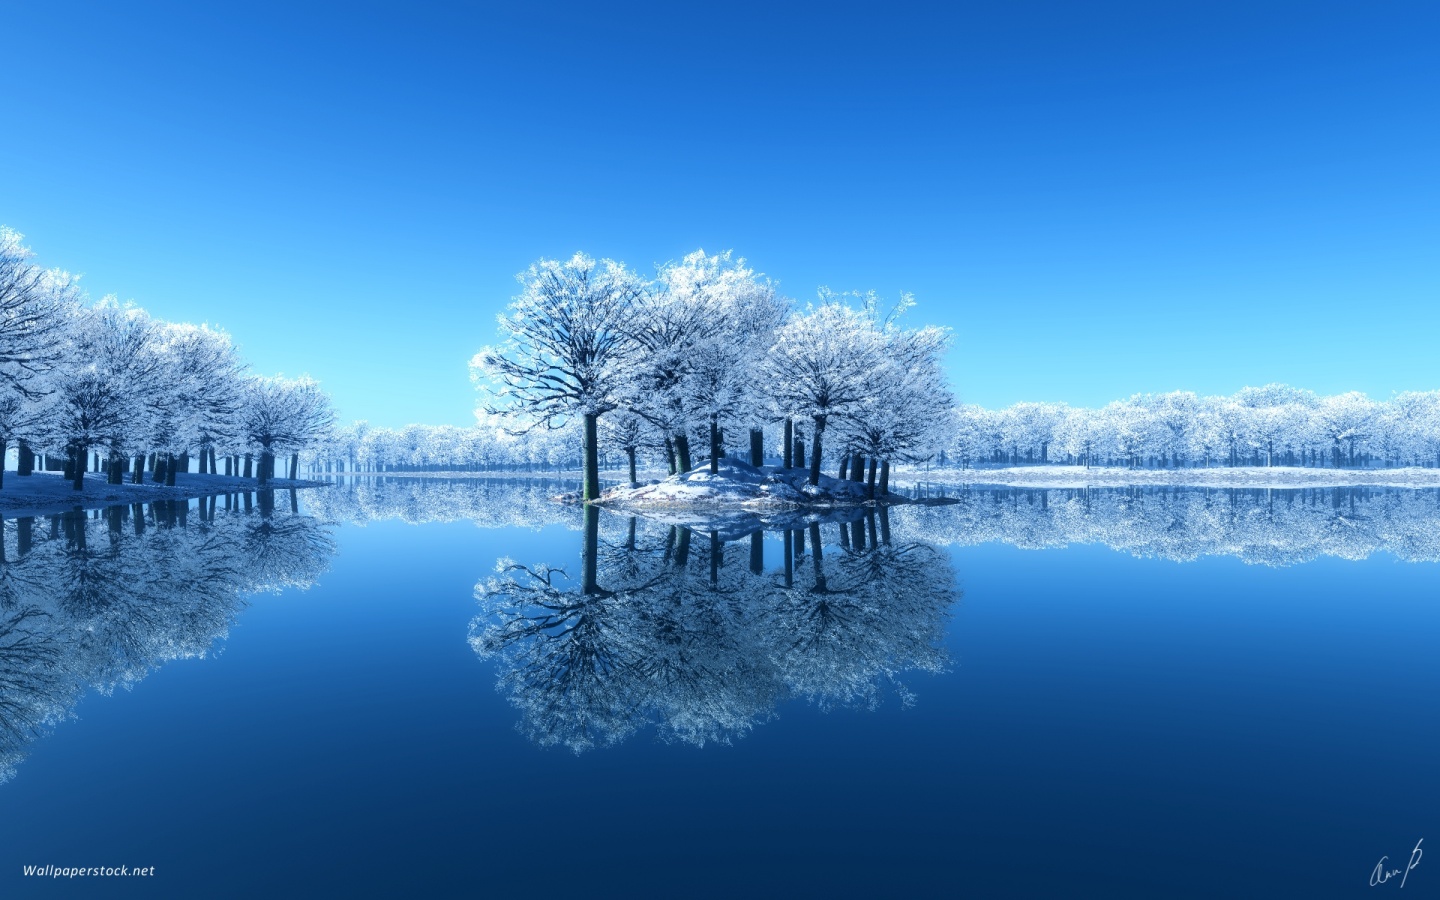 Beautiful snow scenery wallpaper - images - tbwnz.com